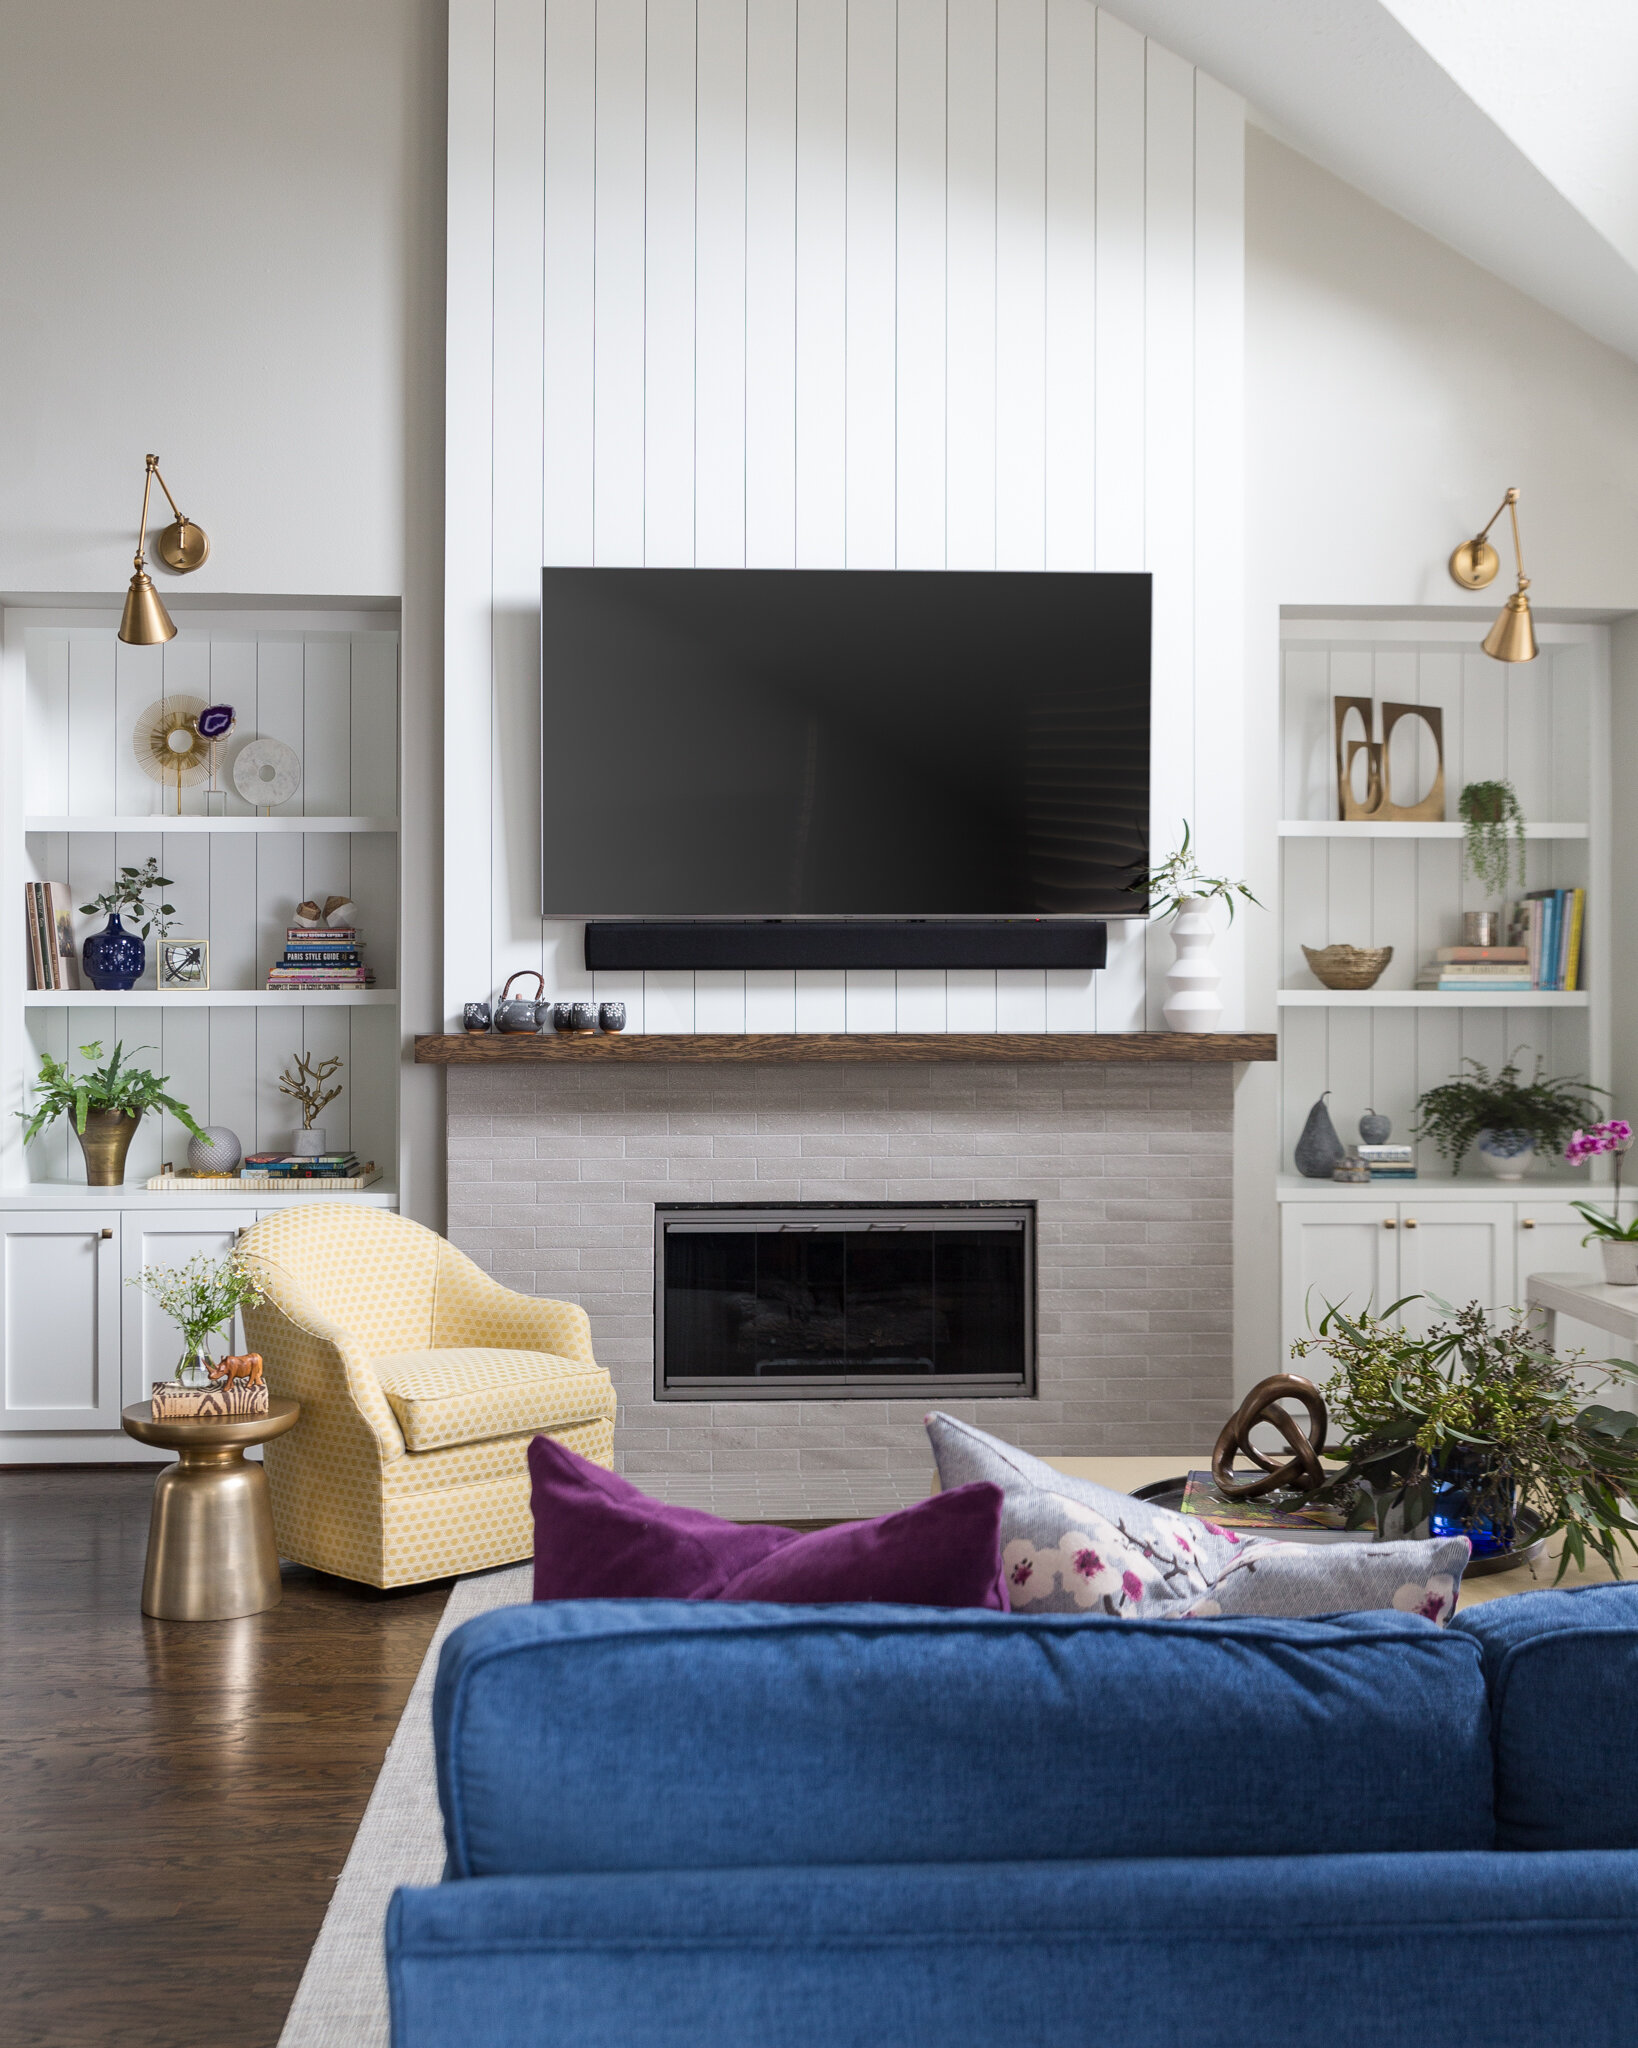 How To Decorate A Mantel When You Have A Tv Above It! — Designed